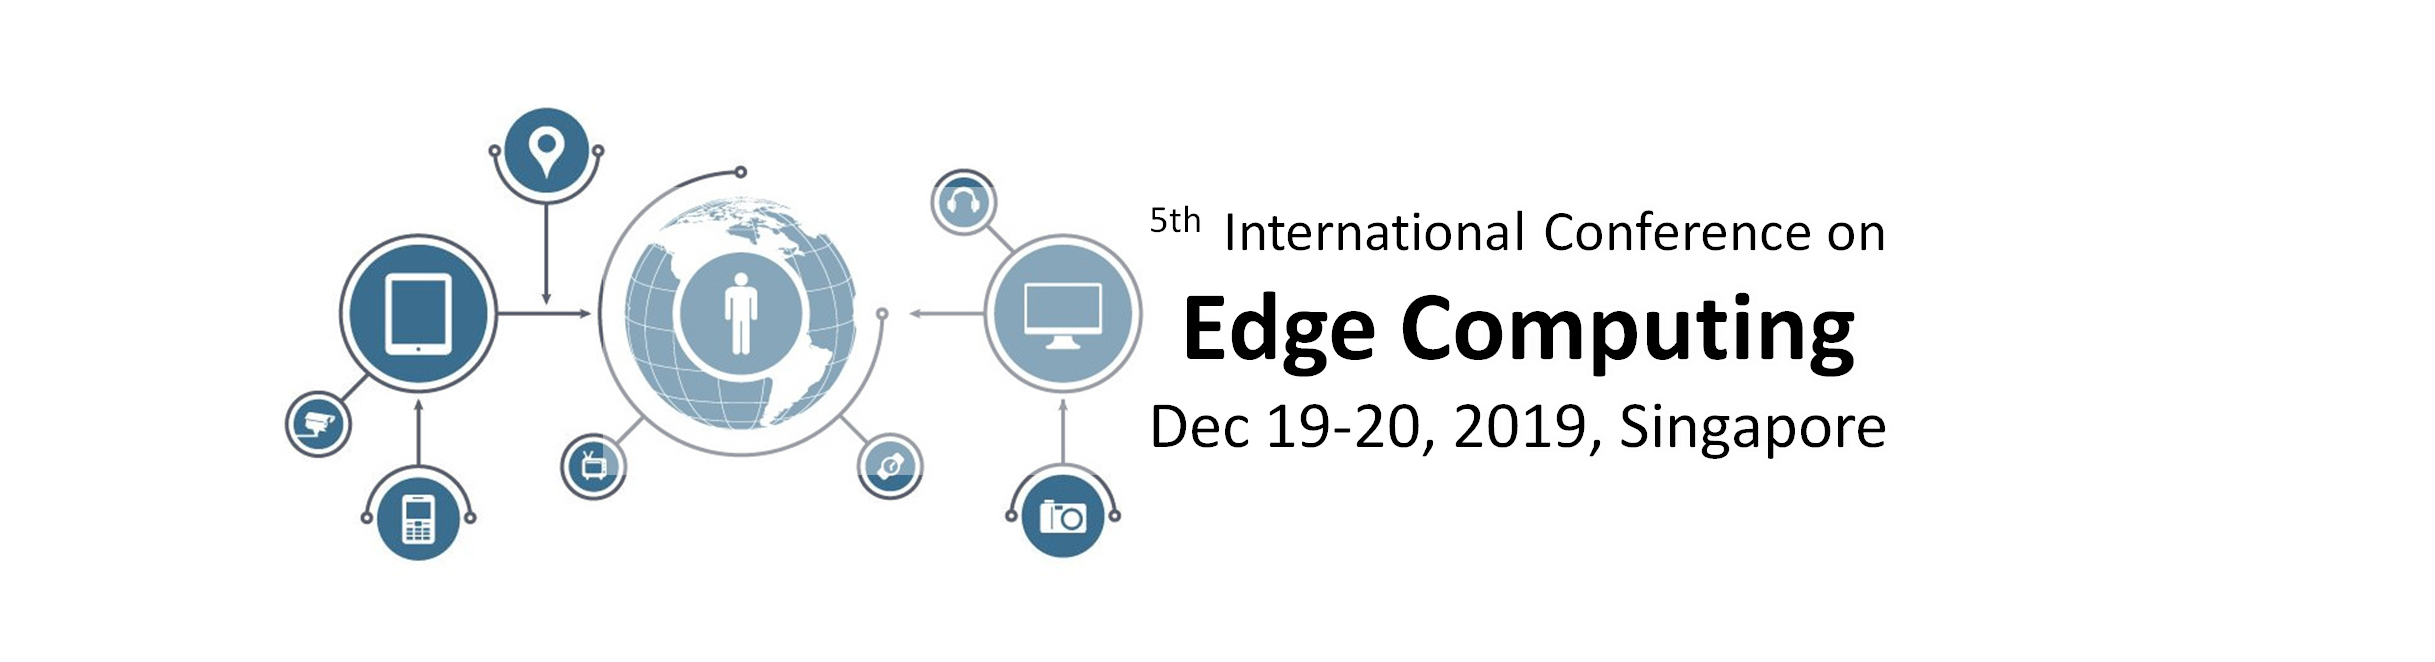 5th International Conference on Edge Computing, Singapore, Central, Singapore